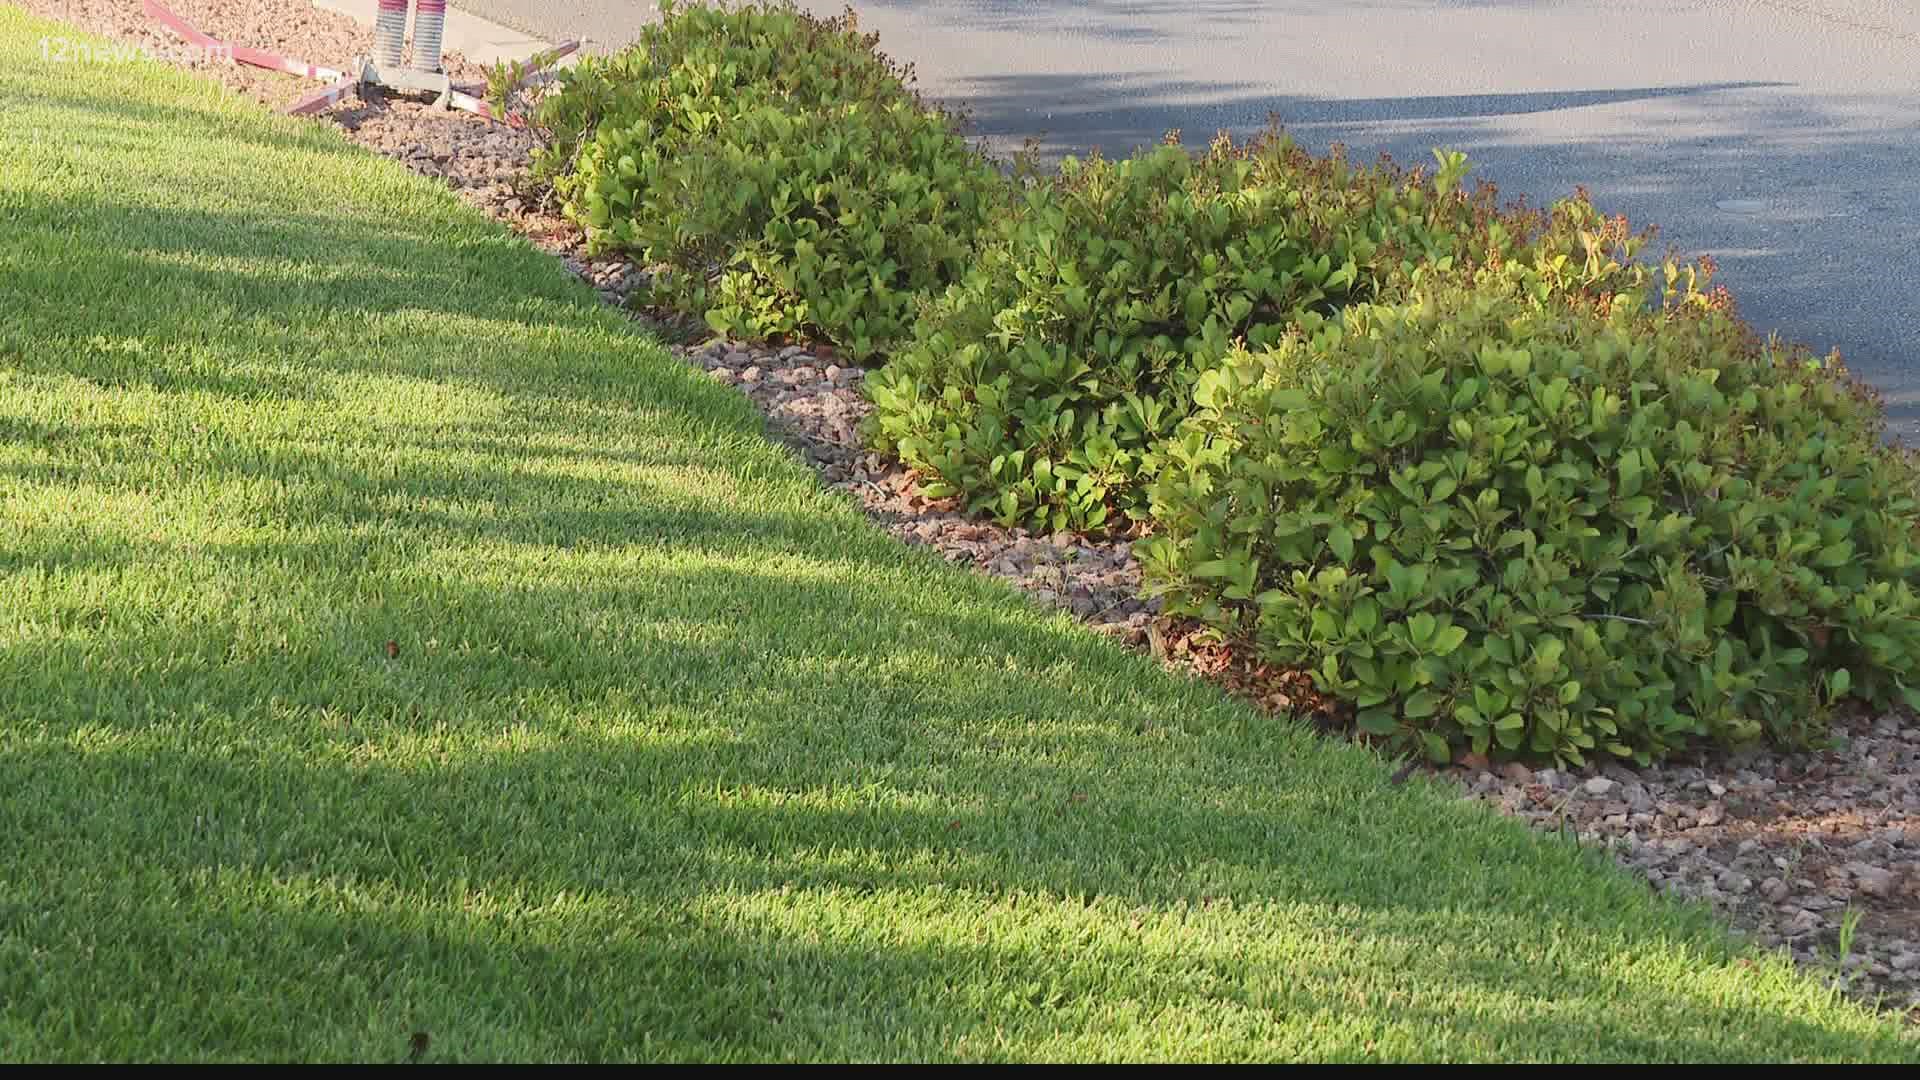 To save water conservation experts are suggesting Arizona get rid of grass found on the sides of roads, in medians and decorating the front of office complexes.